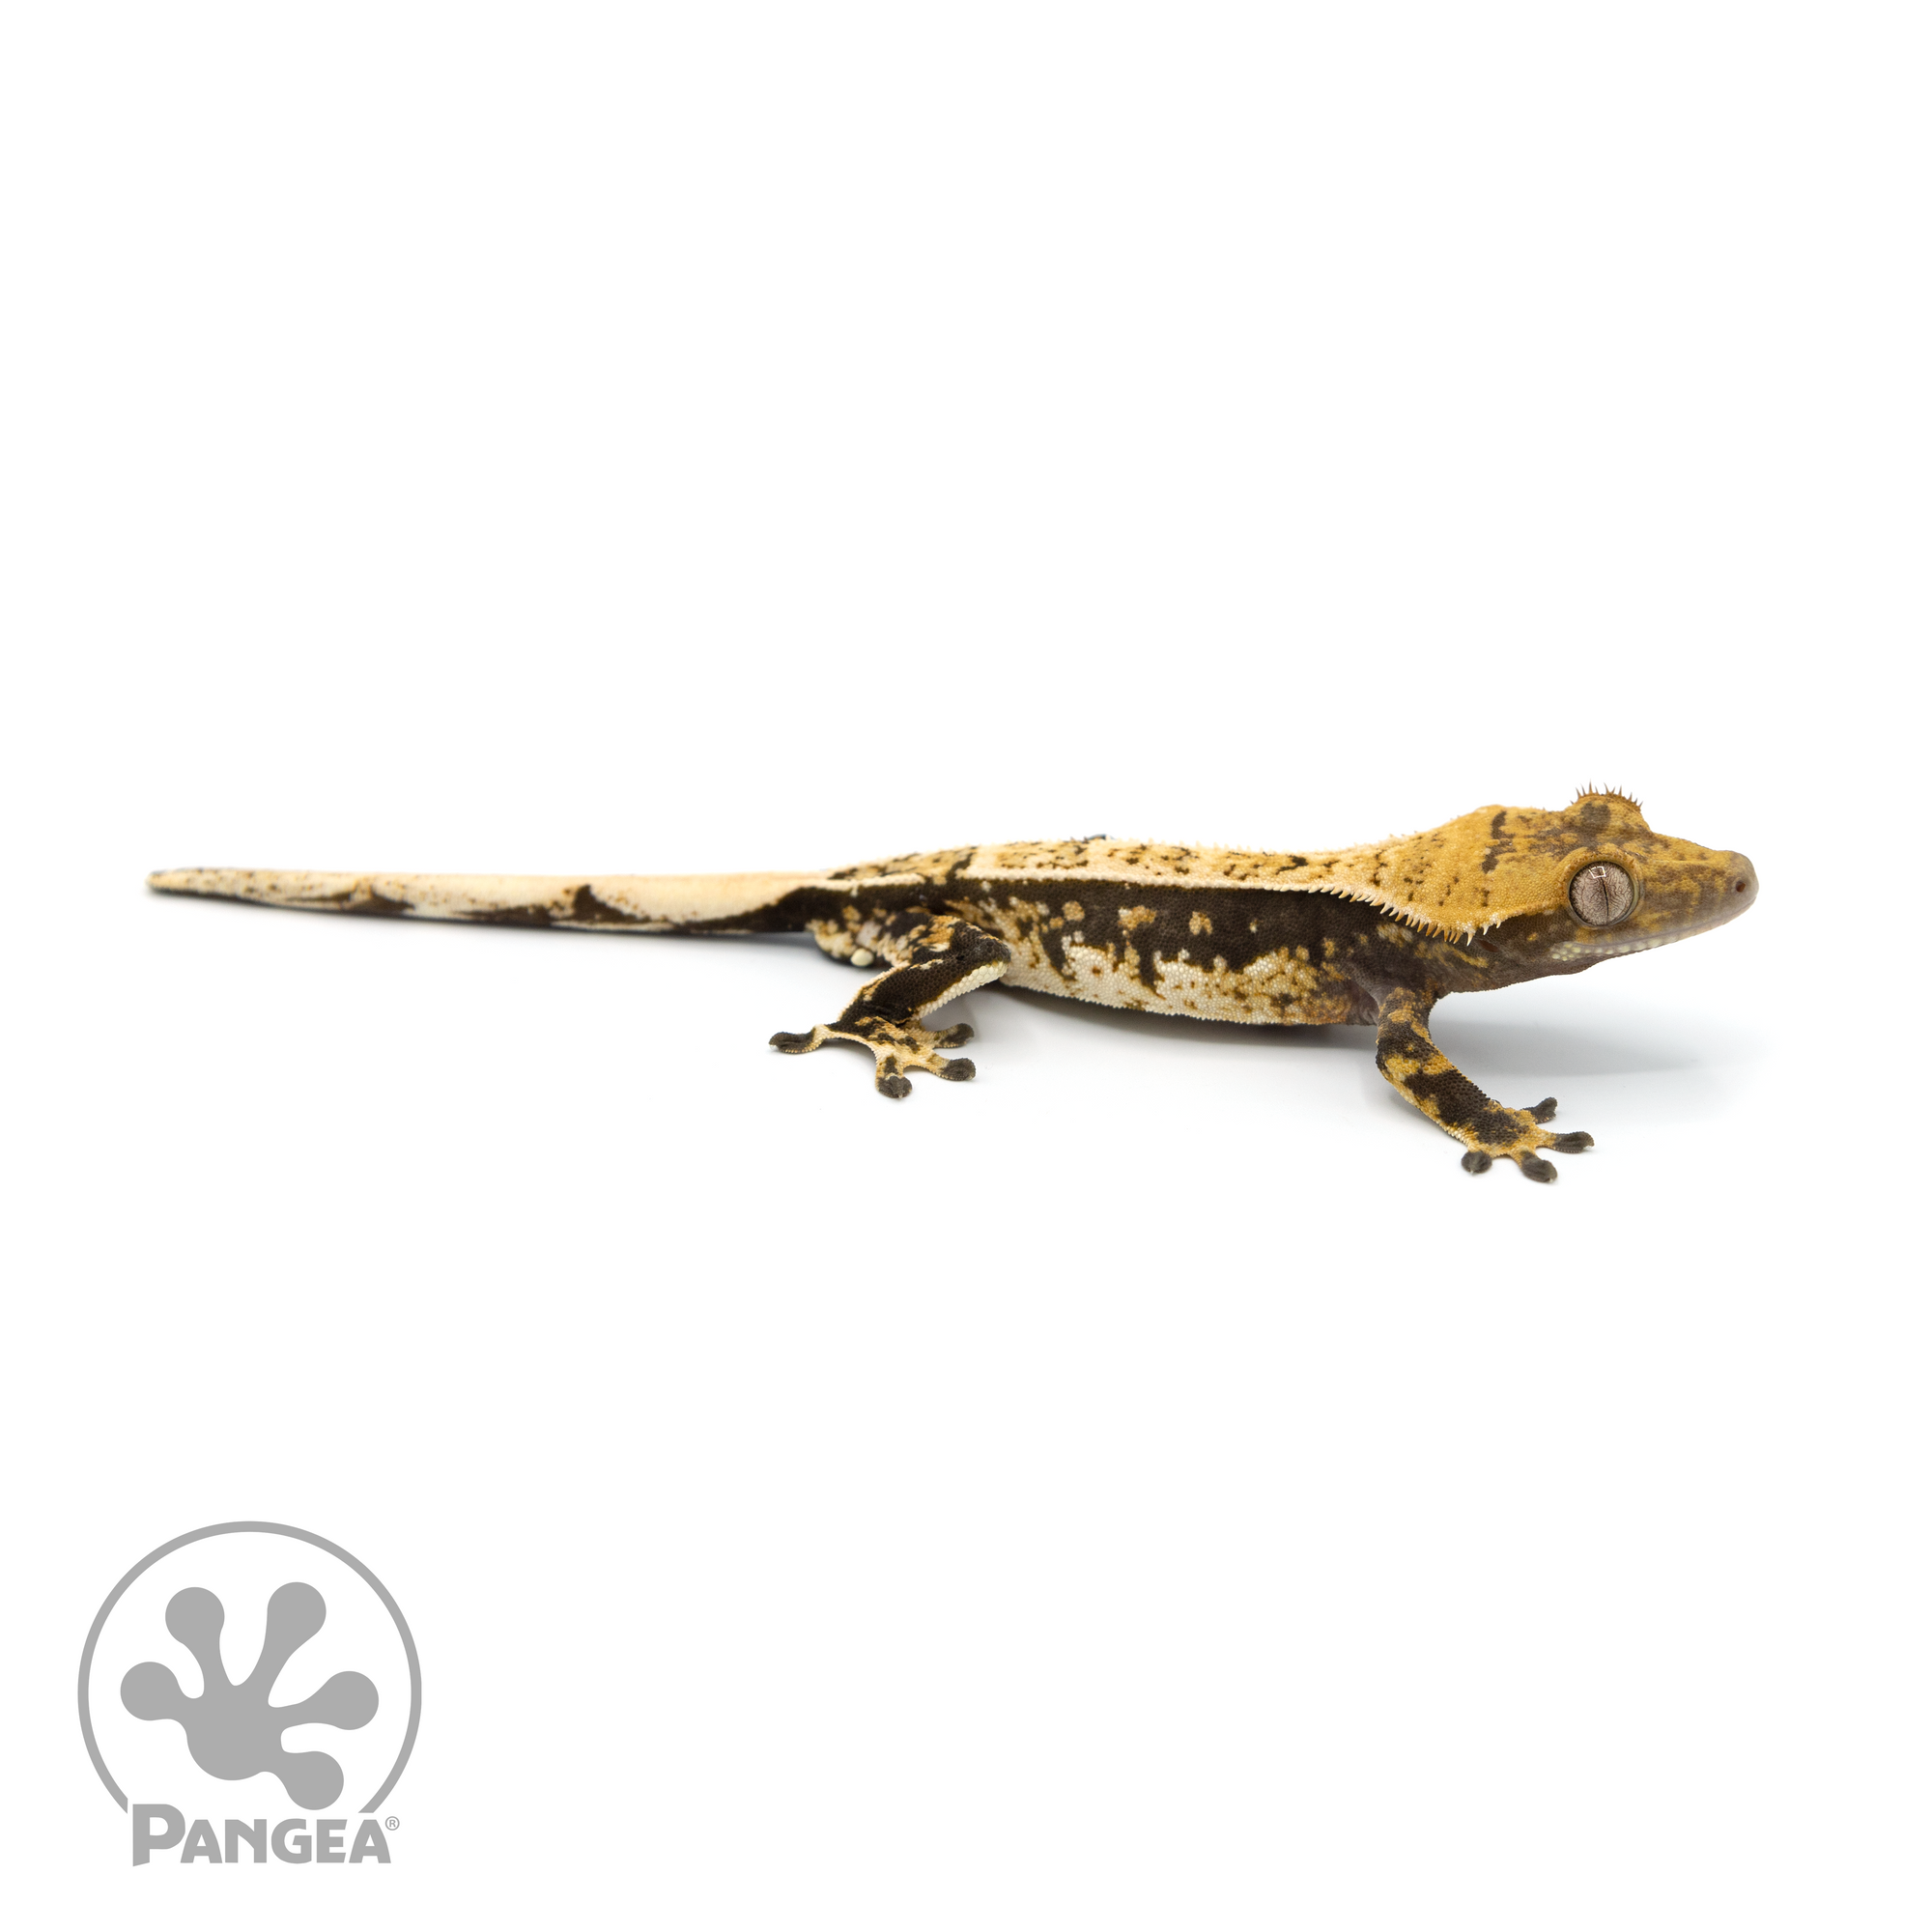 Male Extreme Harlequin Crested Gecko Cr-1122 looking right 